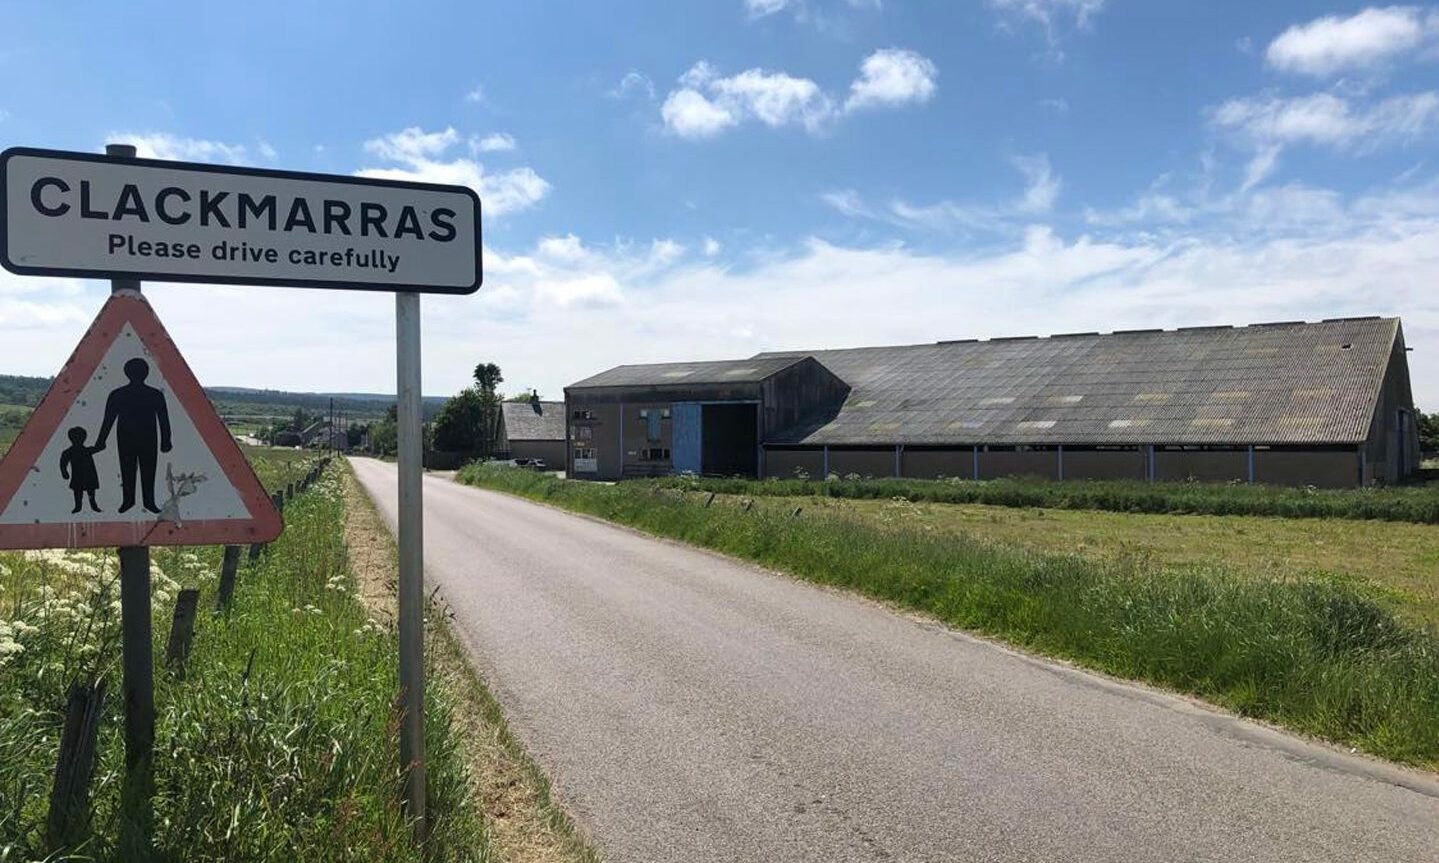 The incidents are alleged to have happened at Clackmarras Farm.